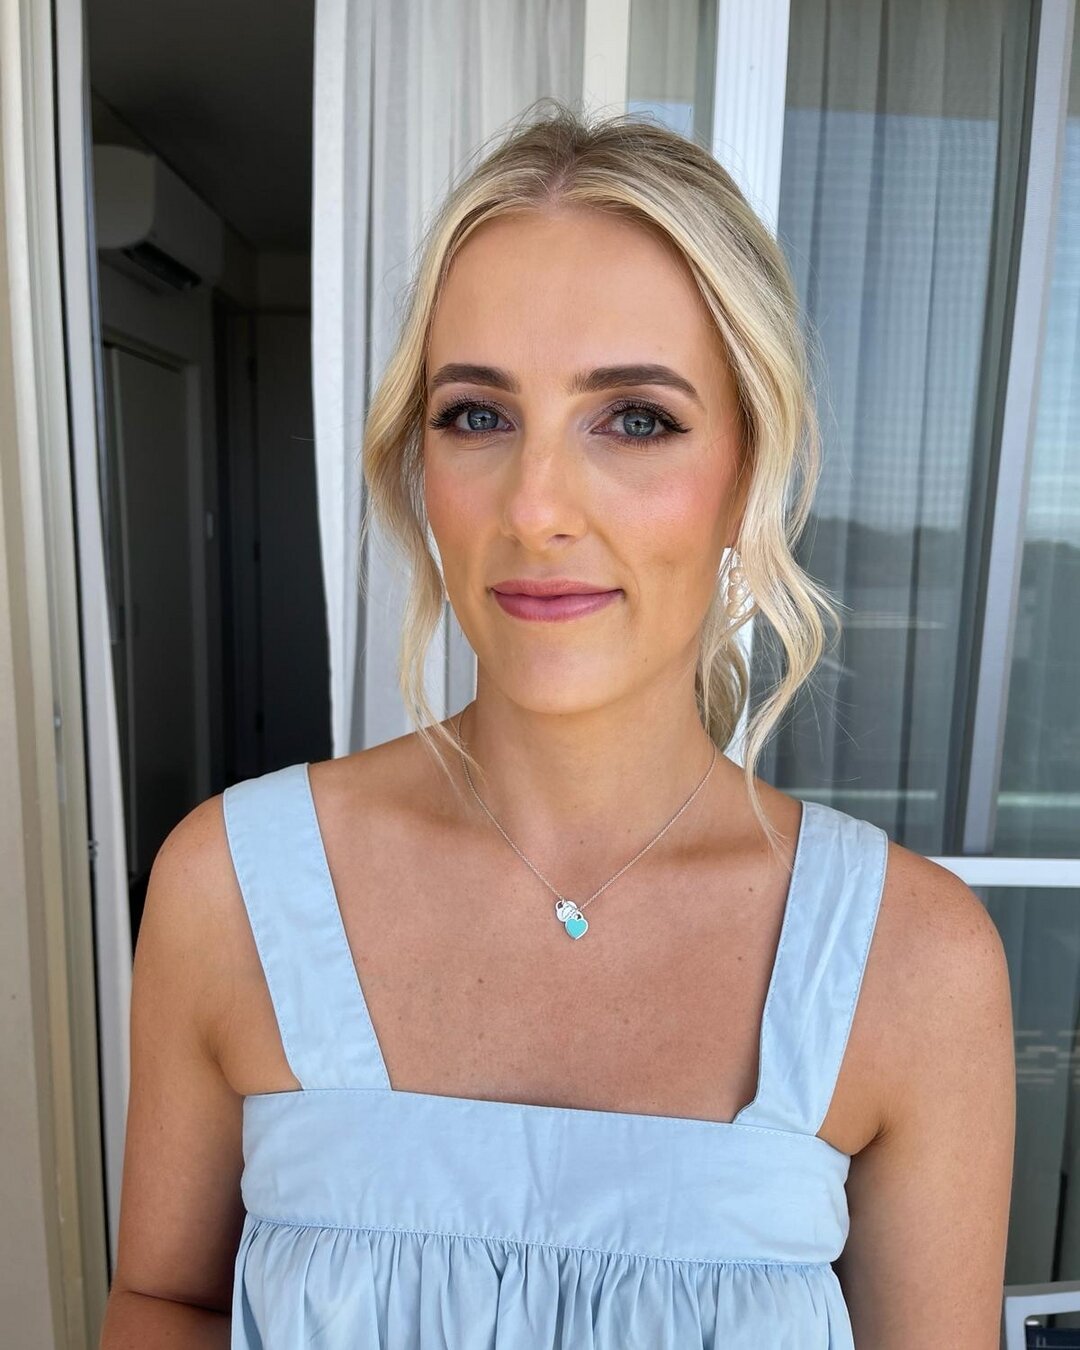 Bridesmaid hair and makeup by Brit. 

Click the Book Now link in our bio to schedule your appointment or

📩 weddings@thebeautybarperth.com.au
📞 0439891480
🌐 www.thebeautybarperth.com.au